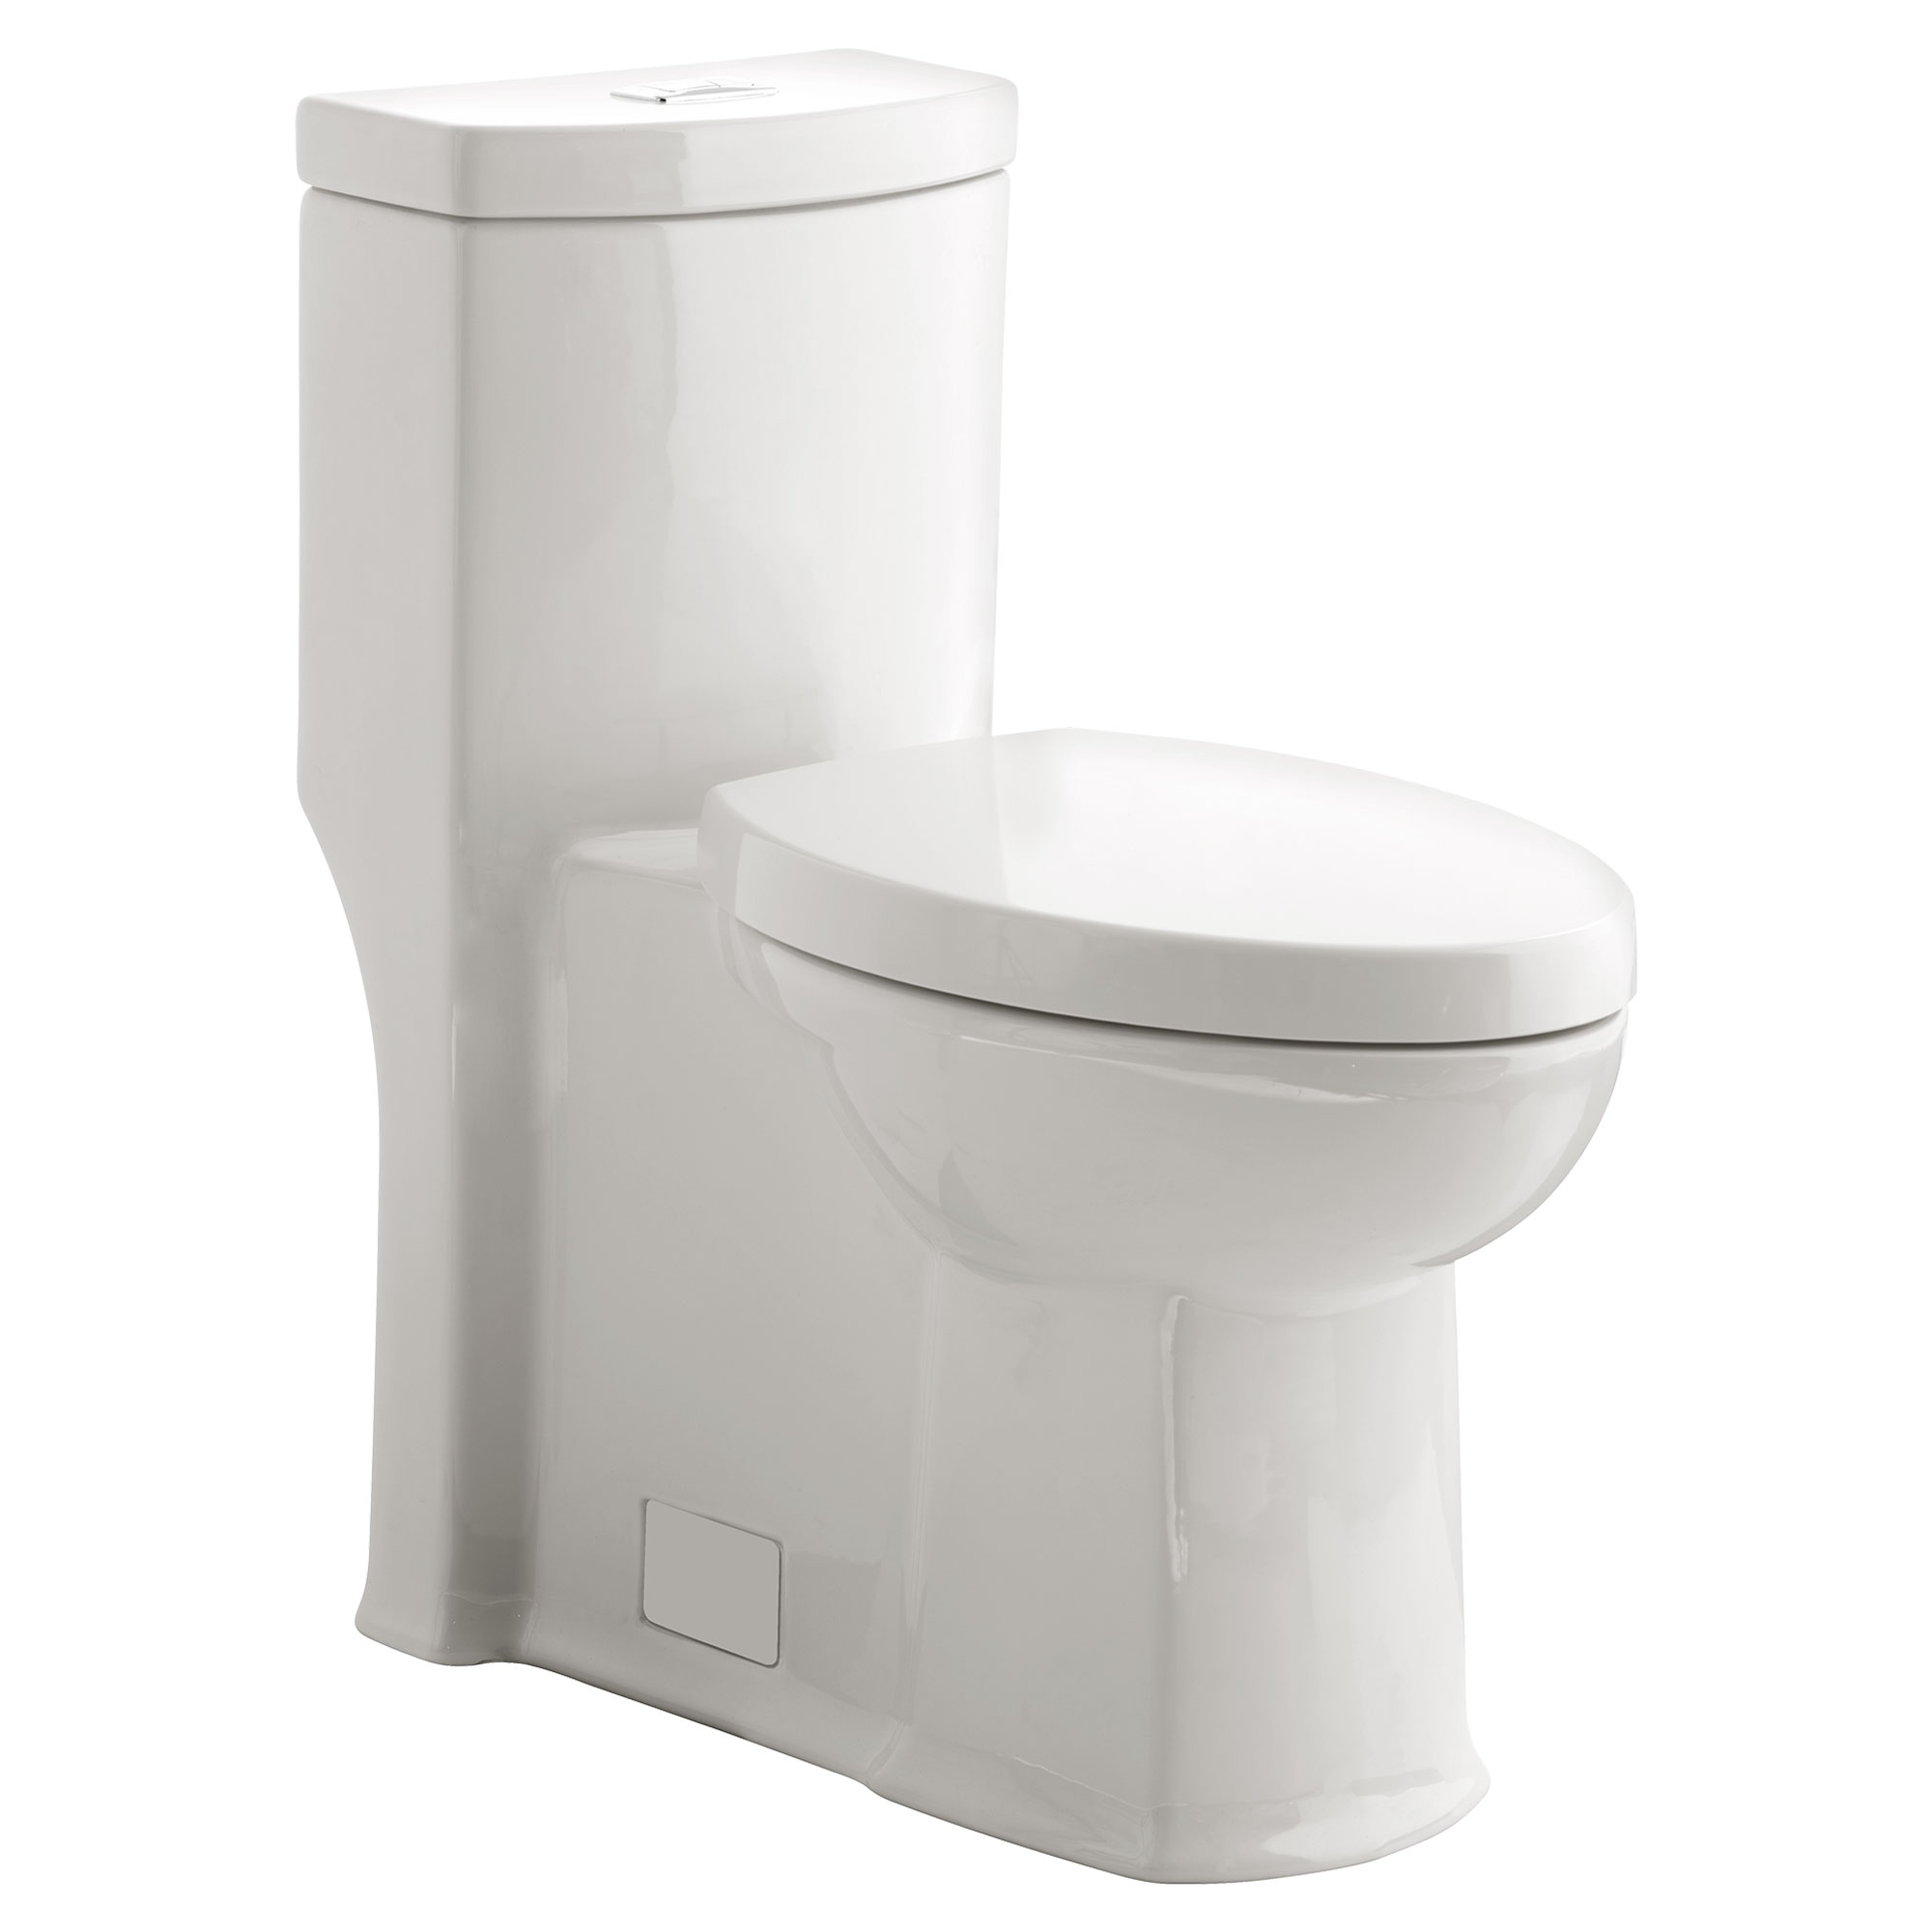 Boulevard® One-Piece Toilet Tank Cover